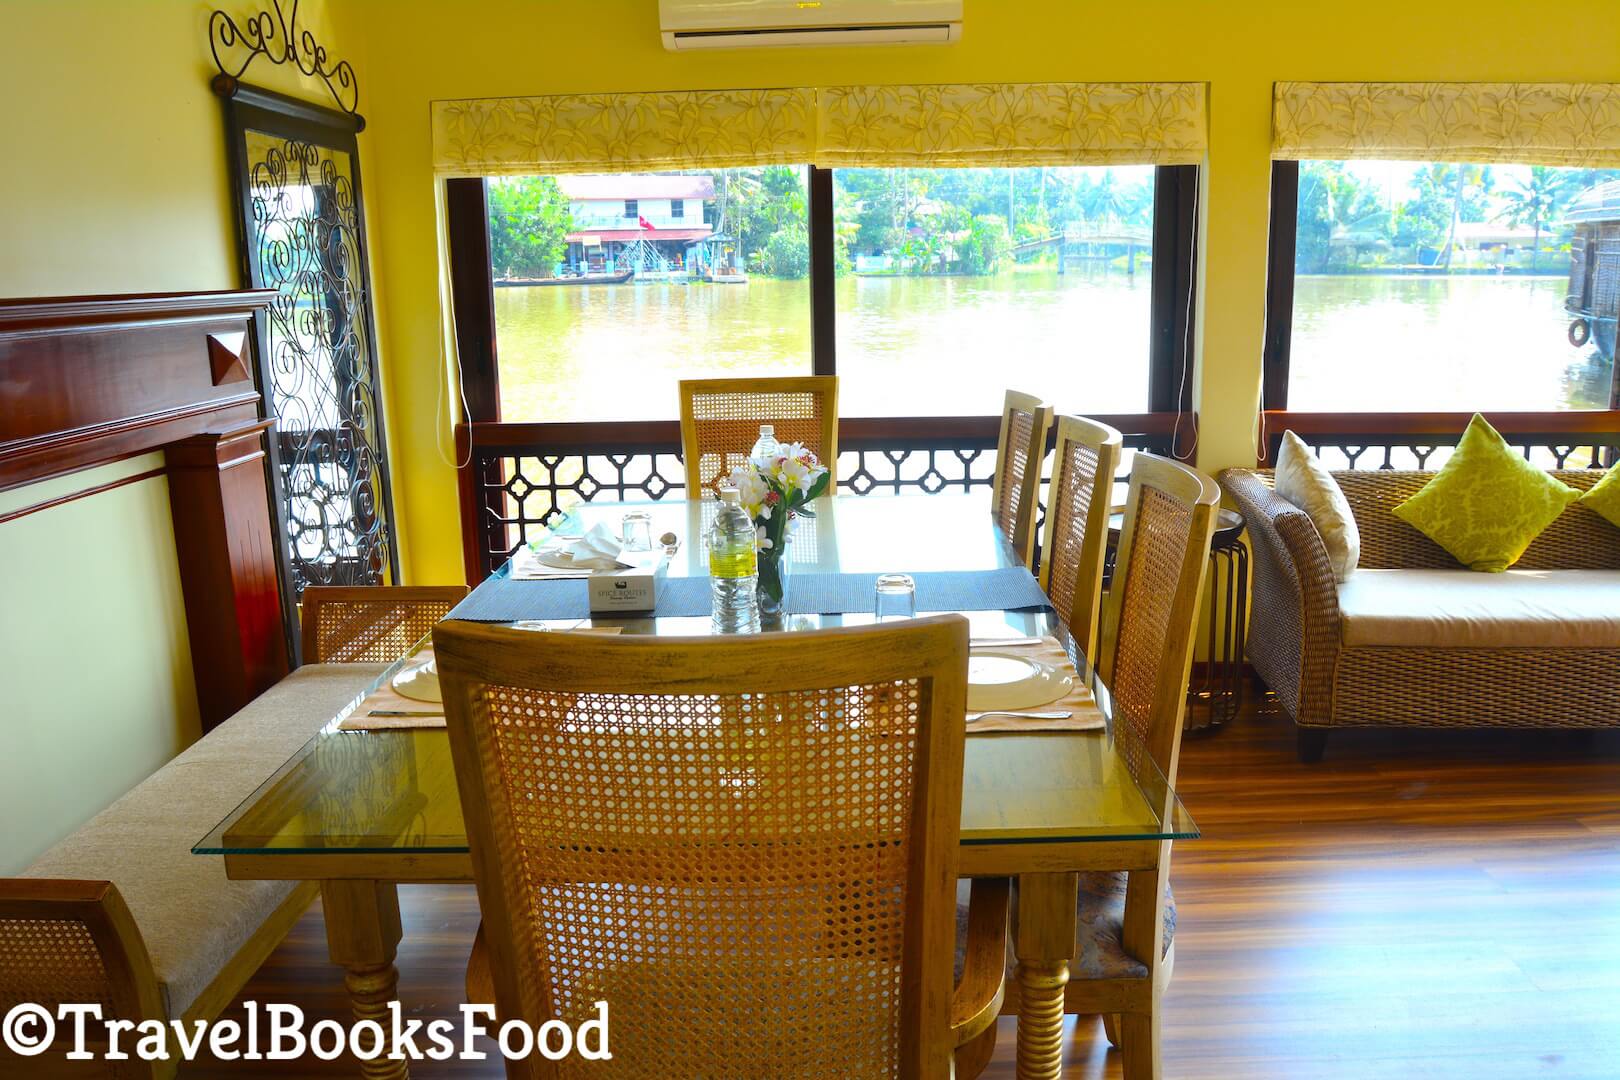 Photo of dining room inside Spice Routes Luxury Houseboat in Kerala, India